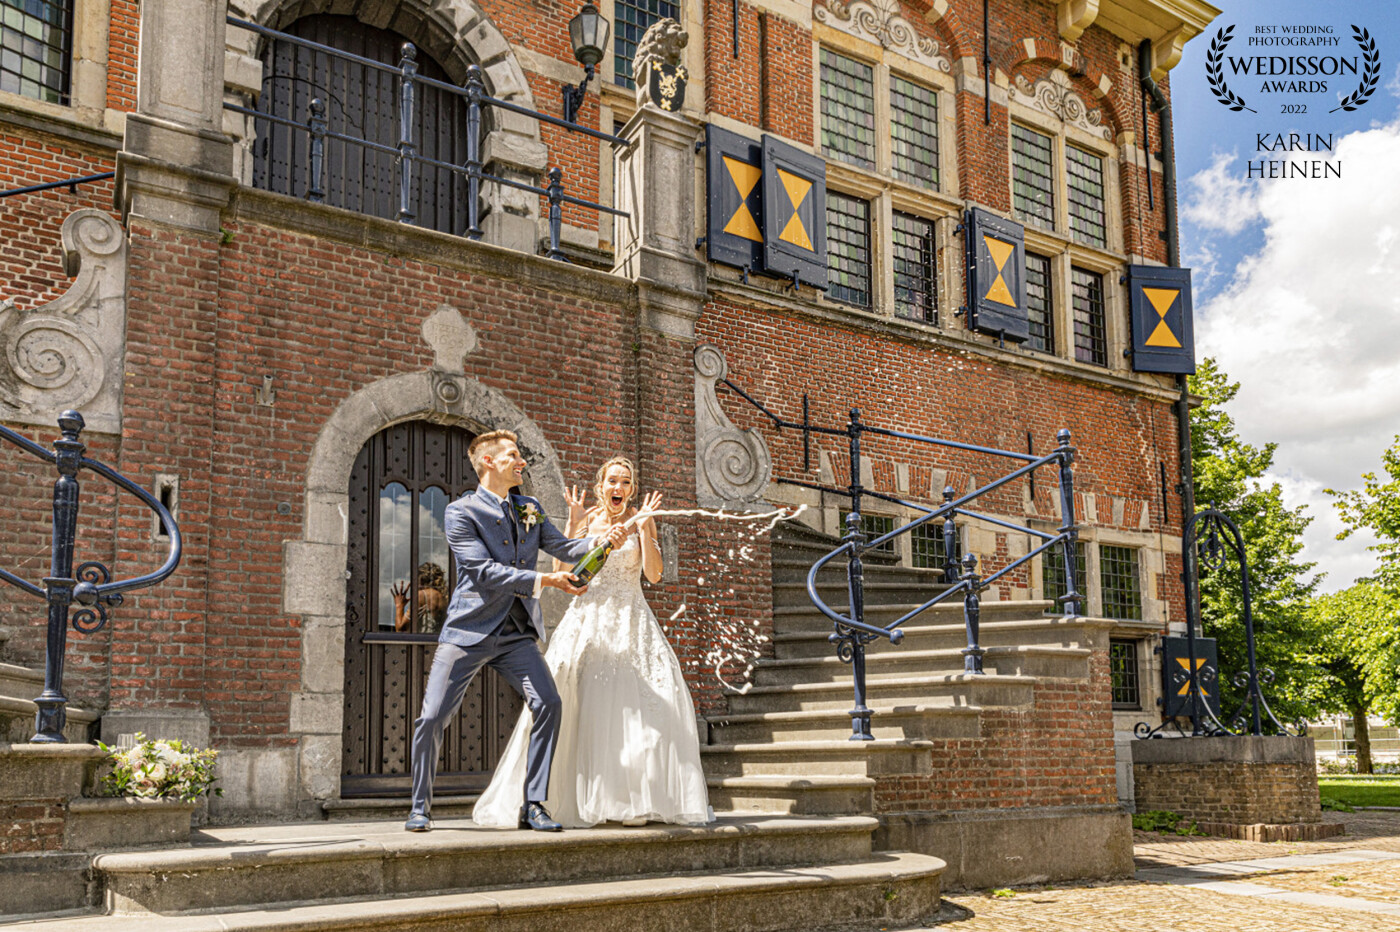 Klundert is a small medieval fortified city in the Southwest of The Netherlands. A great setting for a small personal toast of Jenny and Richard, who got married in the tail of May 2022. Since their wedding day had been postponed due to the pandemic, the relief and joy were huge when their big day finally arrived. We think this shot is a fine reflection of all these 'bottled up' emotions. A big thanks to Wedisson for this recognition.